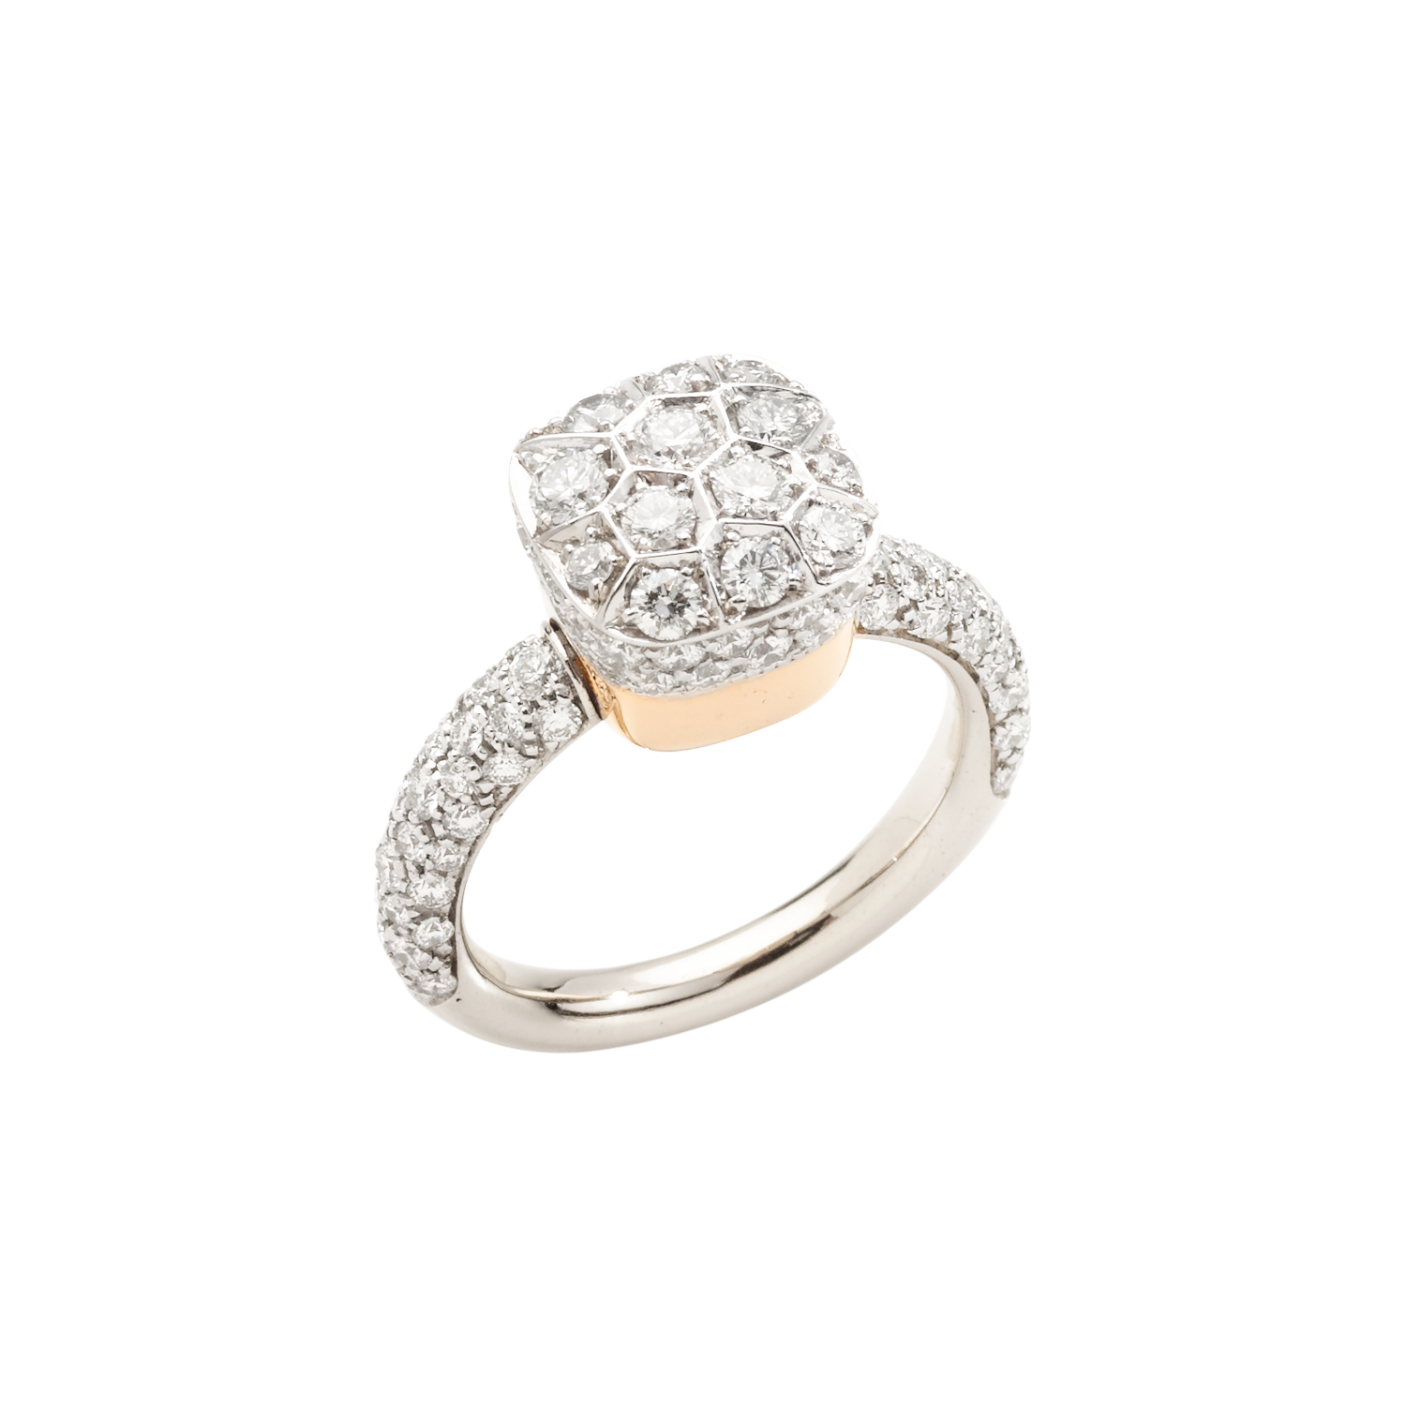 PAC2028_O6WHR_DB000_010_Pomellato_ring-nudo-solitaire-white-gold-18kt-rose-gold-18kt-diamond.png